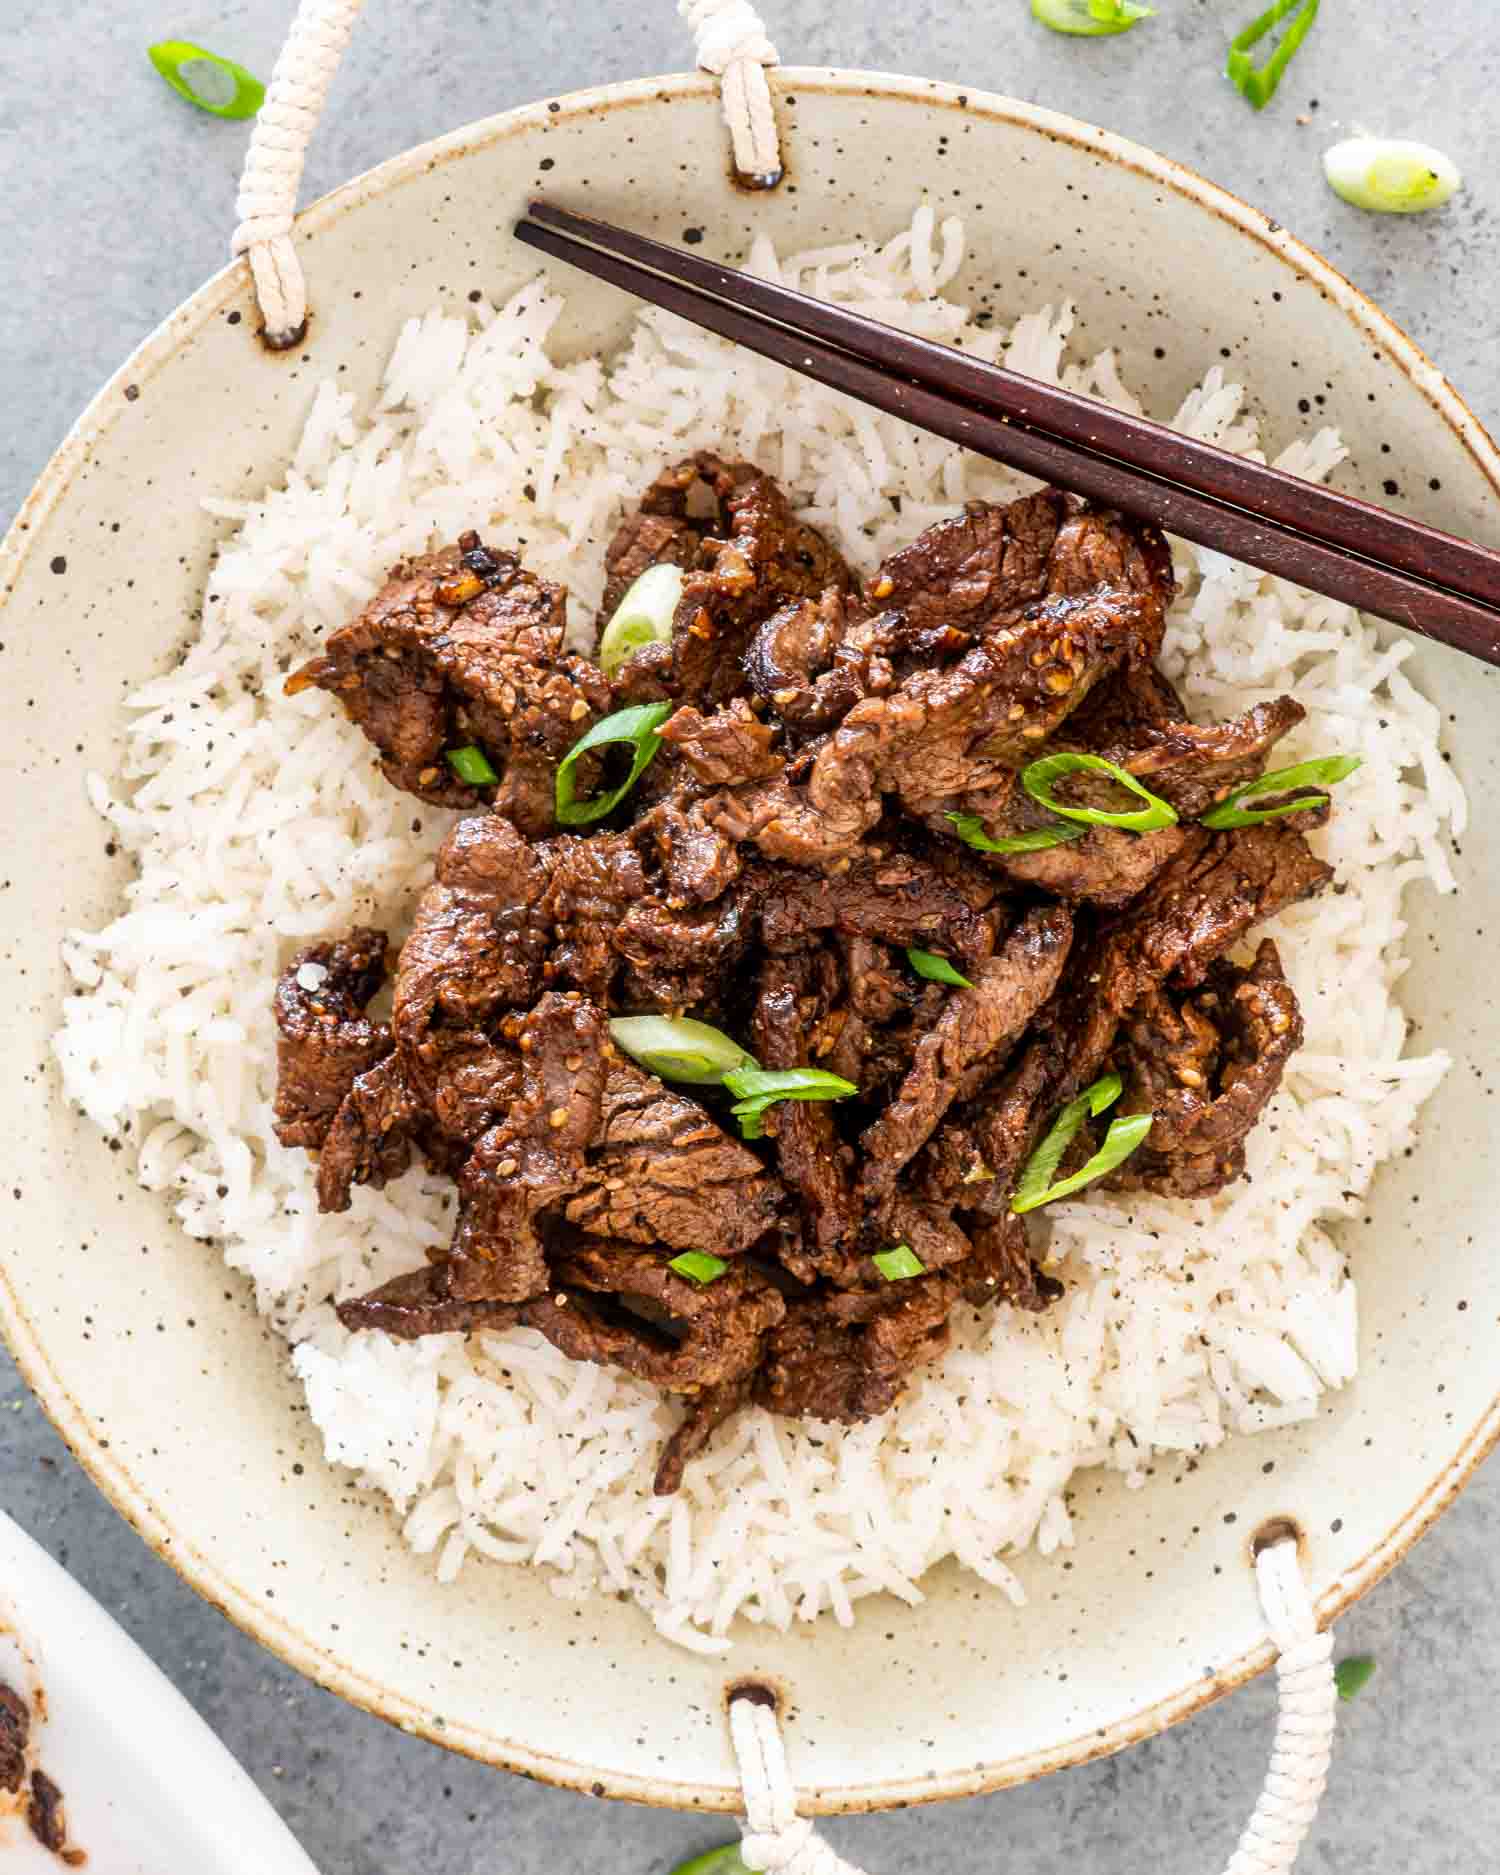 beef bulgogi over a bed of rice garnished with green onions.